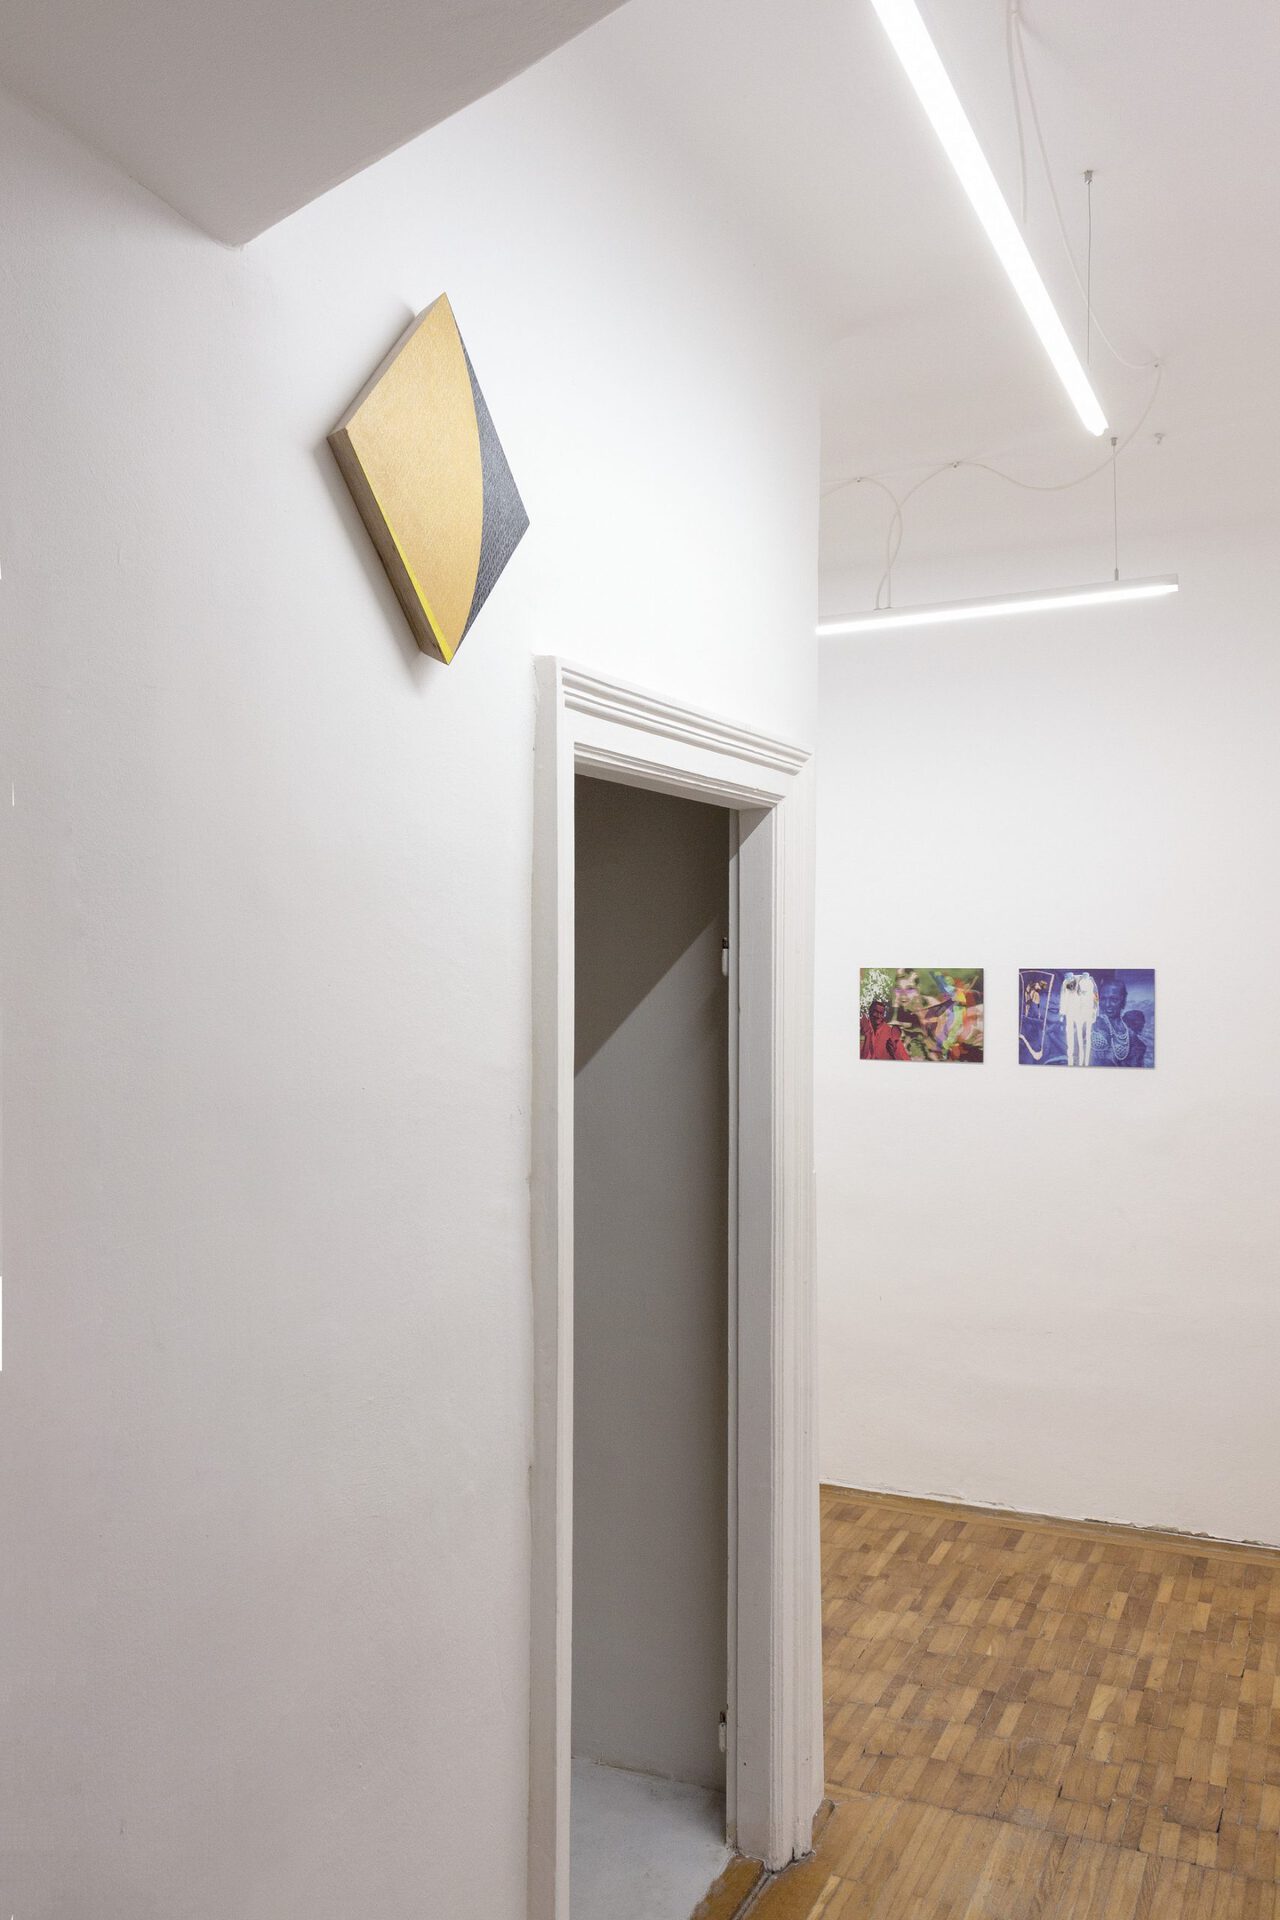 left: Quirin Babl, Das Lied des Gelben Domino (after R.H. Quaytman, Voyelle, Chapter 26, shown 08.11.2013 to 02.02.2014 at mumok, Vienna, in the exhibtion „and materials and Money and Crisis“), 2021. Acryl, diamond dust on wood.  right: Nicholas Grafia, The Cakewalk (Study I) + The Cakewalk (Study II), both 2022. Digital paintings on alu-dibond.